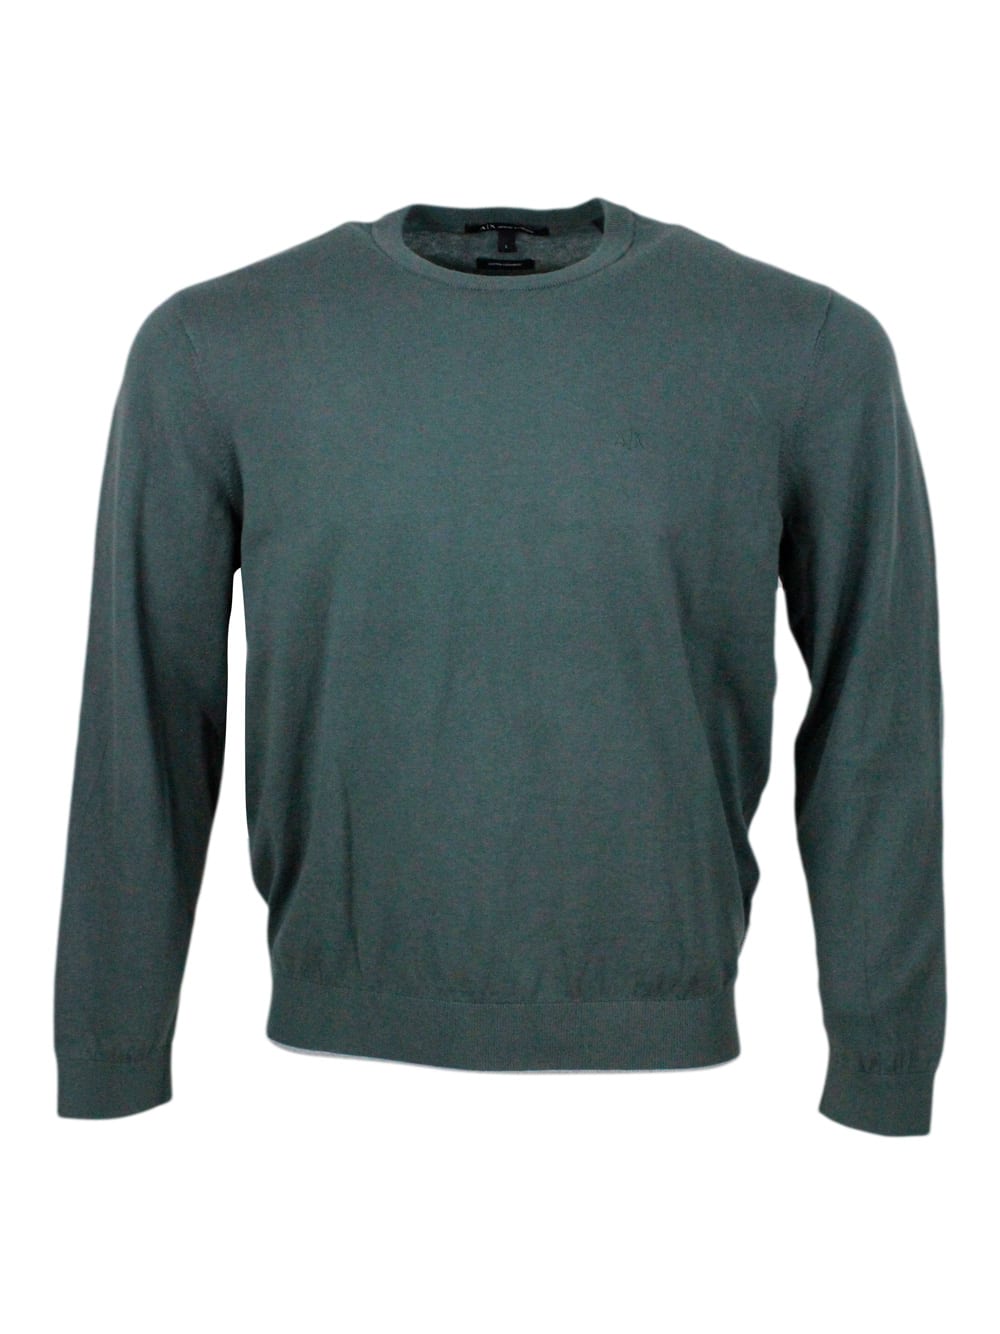 Lightweight Long-sleeved Crew-neck Sweater Made Of Warm Cotton And Cashmere With Contrasting Color Profiles At The Bottom And On The Cuffs